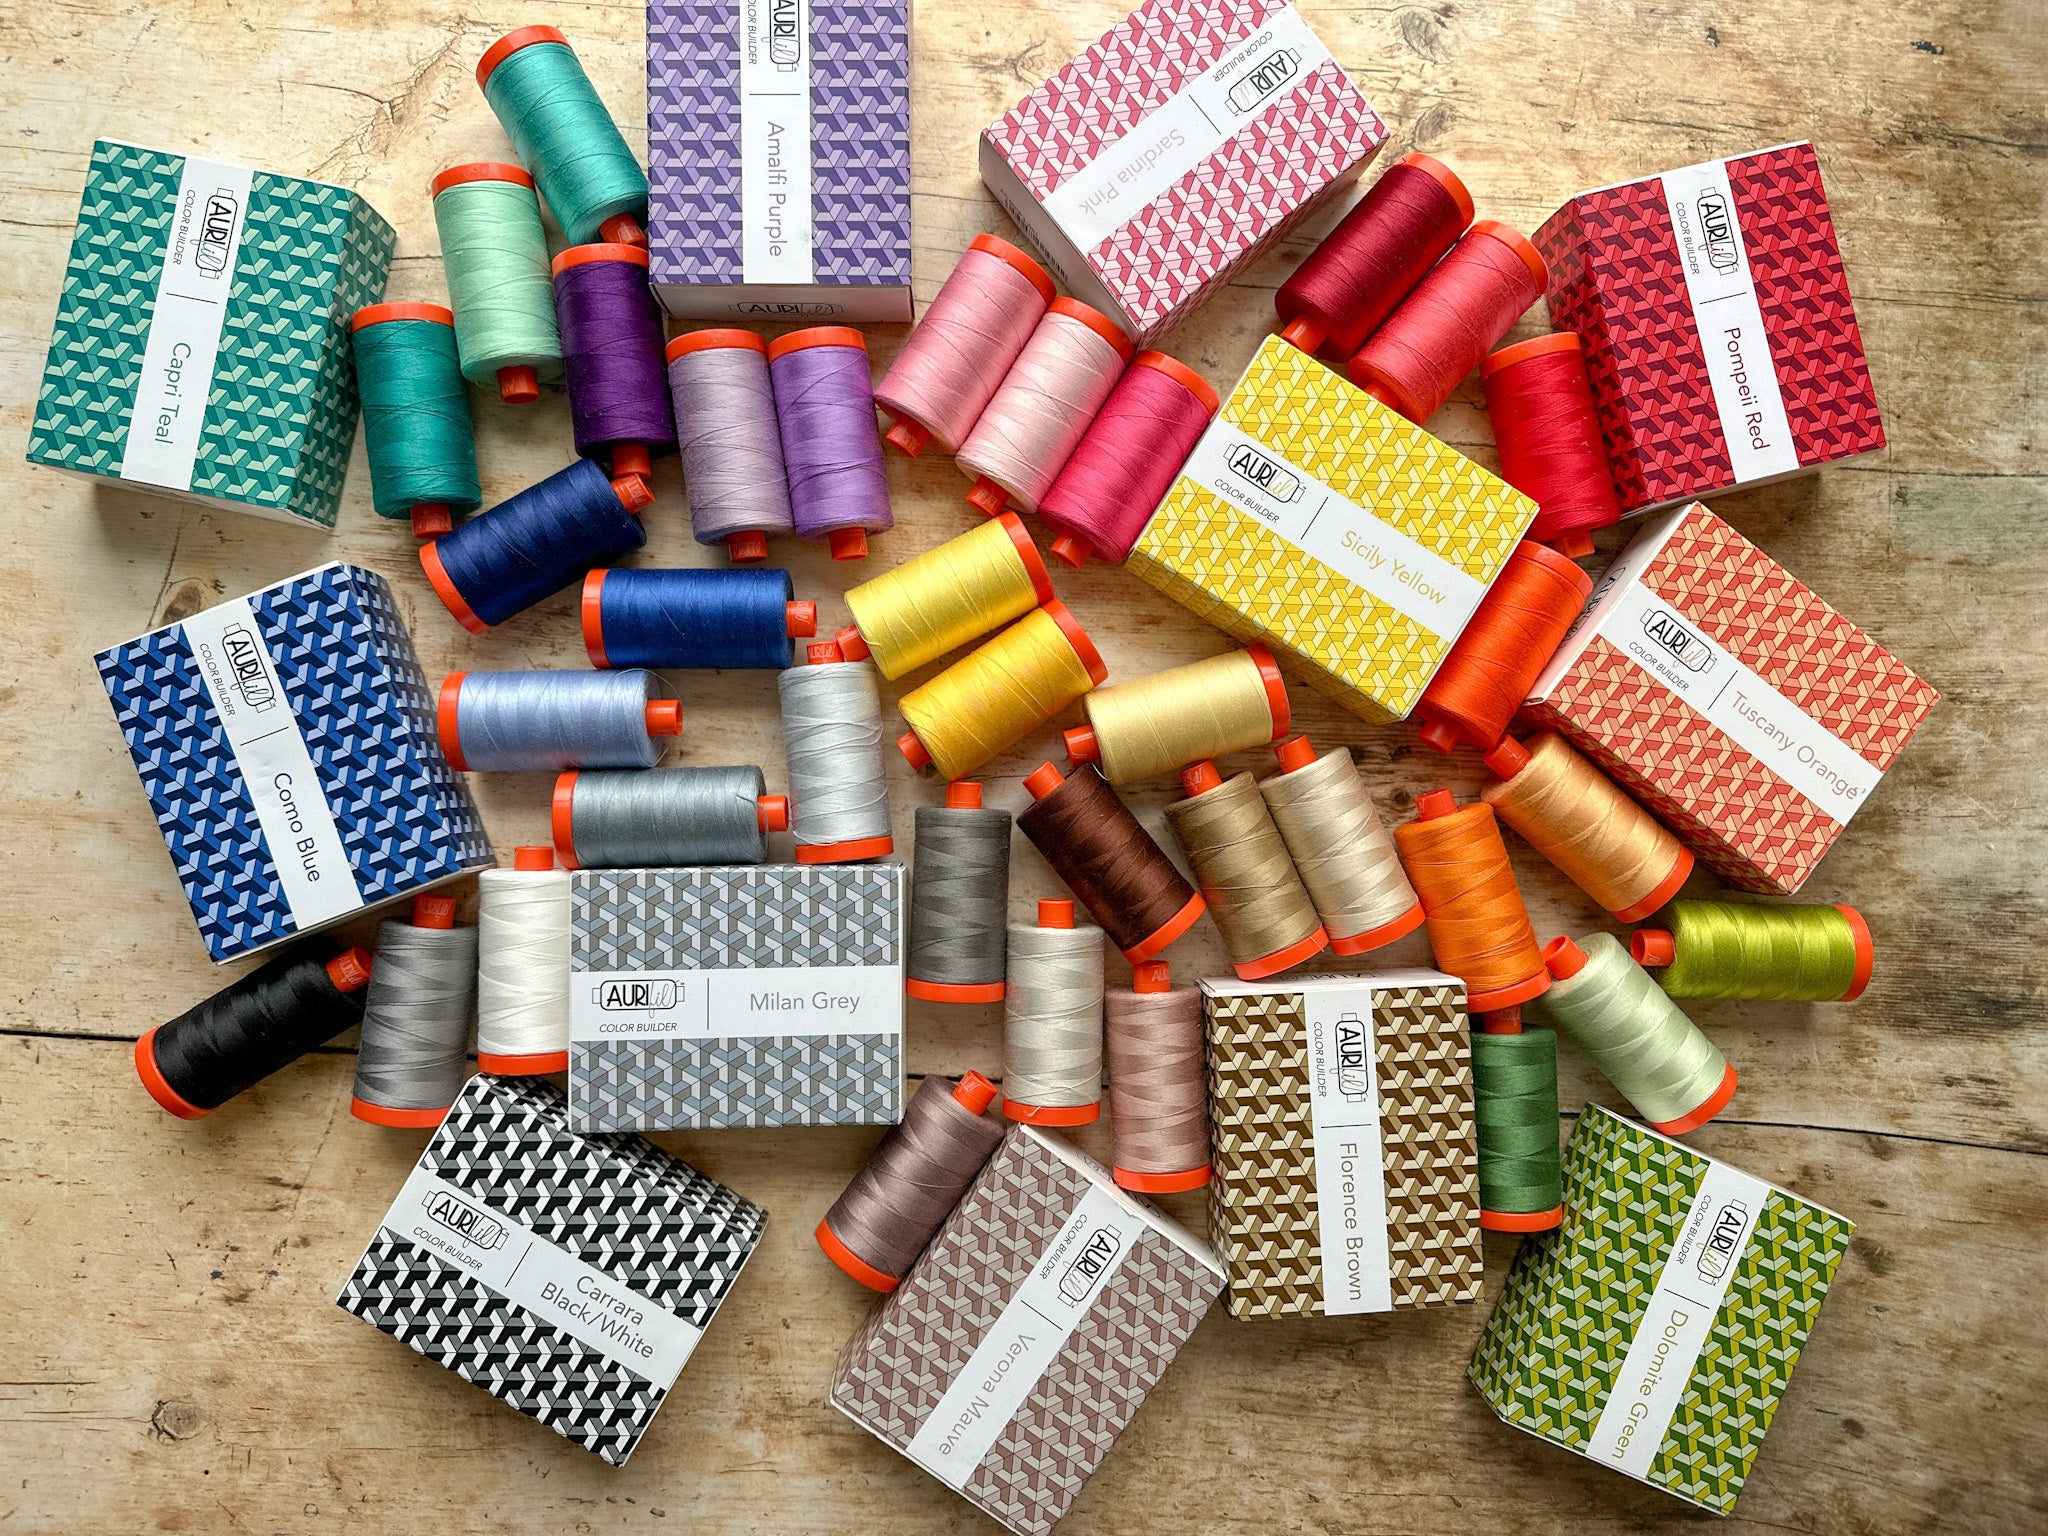 Aurifil Palazzo Block of the Month - FULL COLLECTION